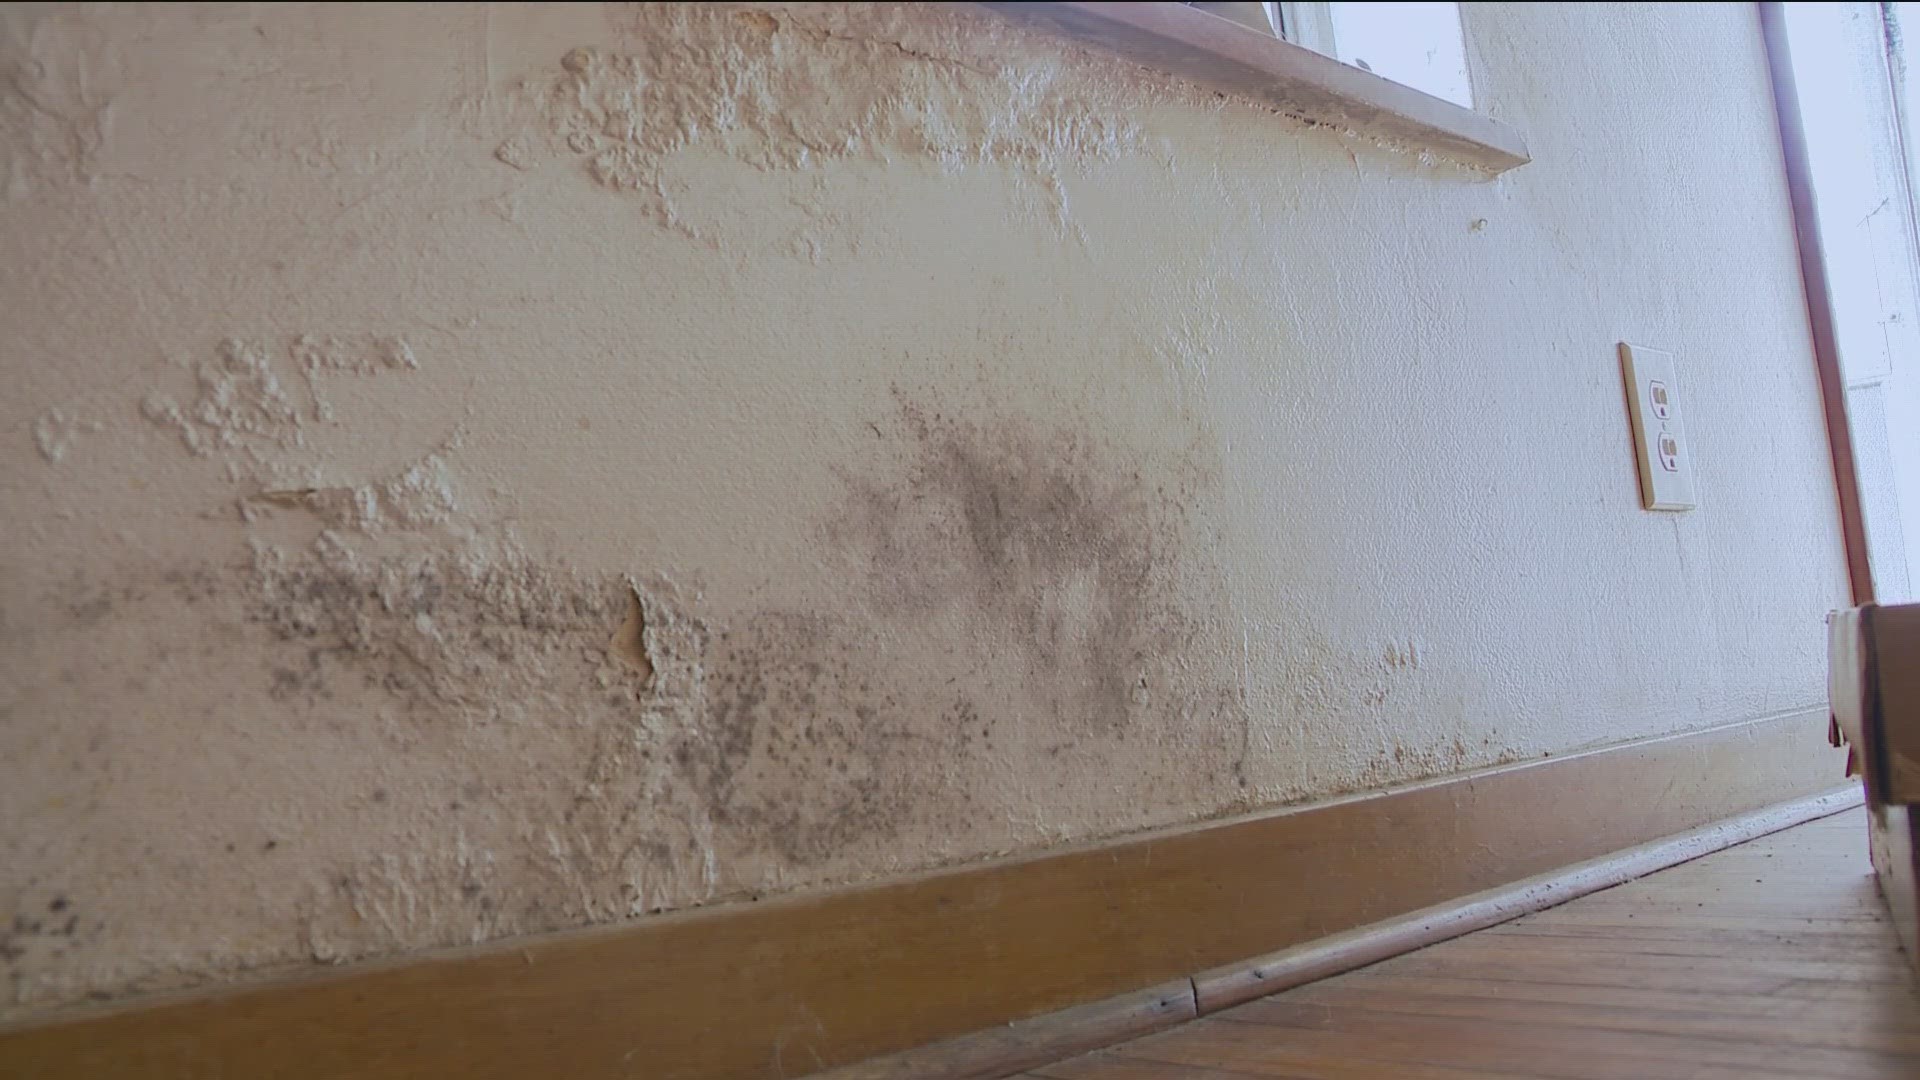 William Burnham reached out to our Call 11 for Action team to report mold in his apartment.